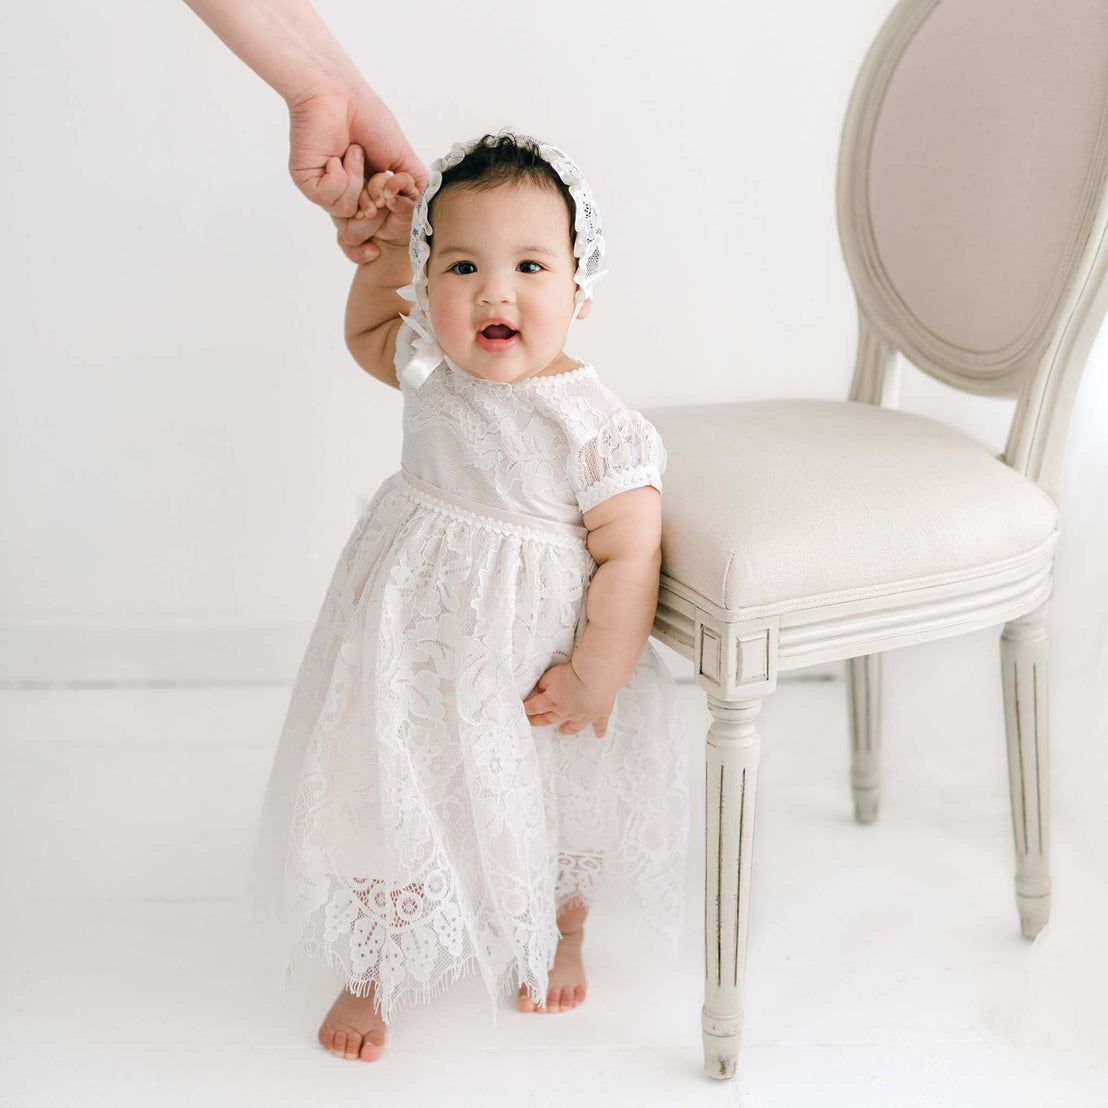 A baby wearing a Victoria Puff Sleeve Christening Dress and Victoria Lace Christening Bonnet stands next to a beige chair, holding onto an adult's hand for support. The background is minimalist with light-colored walls and flooring.